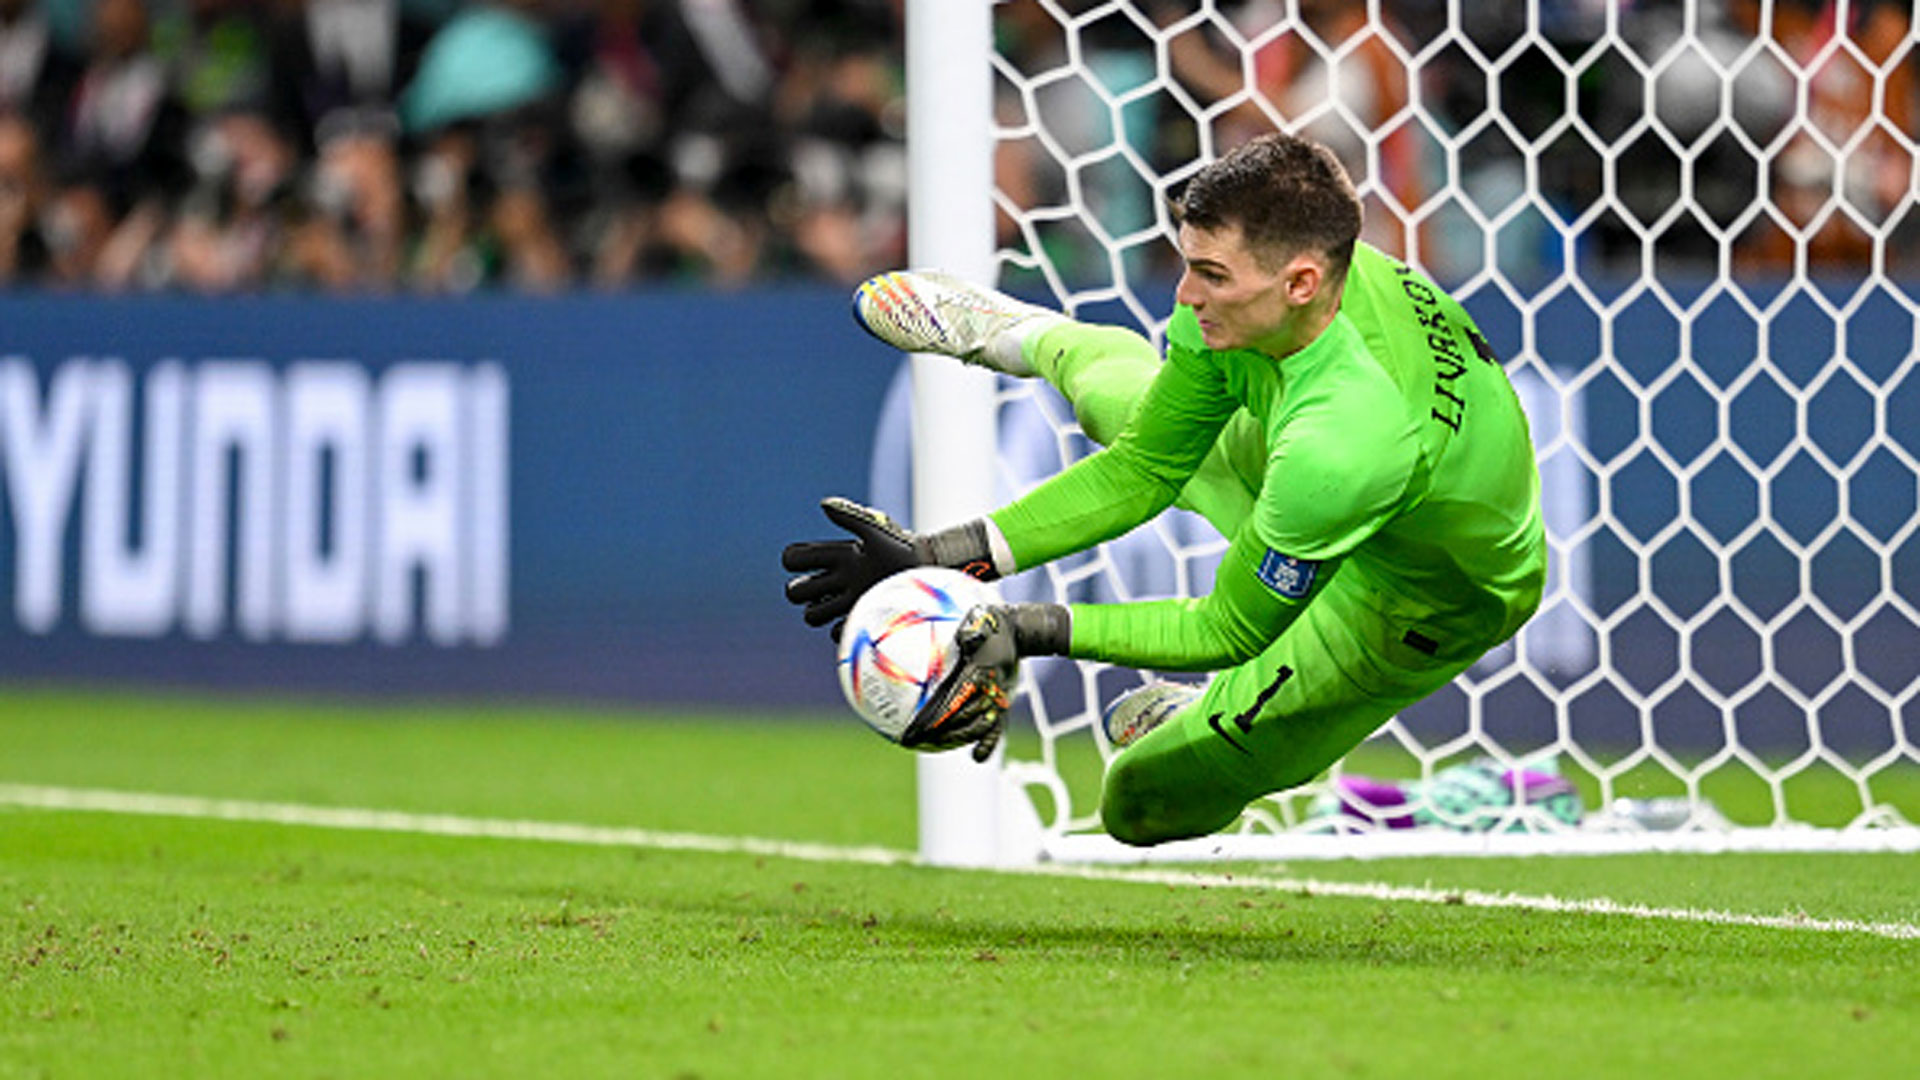 Croatia made it through to the quarter-finals of the 2022 World Cup after defeating Japan on penalties thanks to three penalty saves by Dominik Livakovic